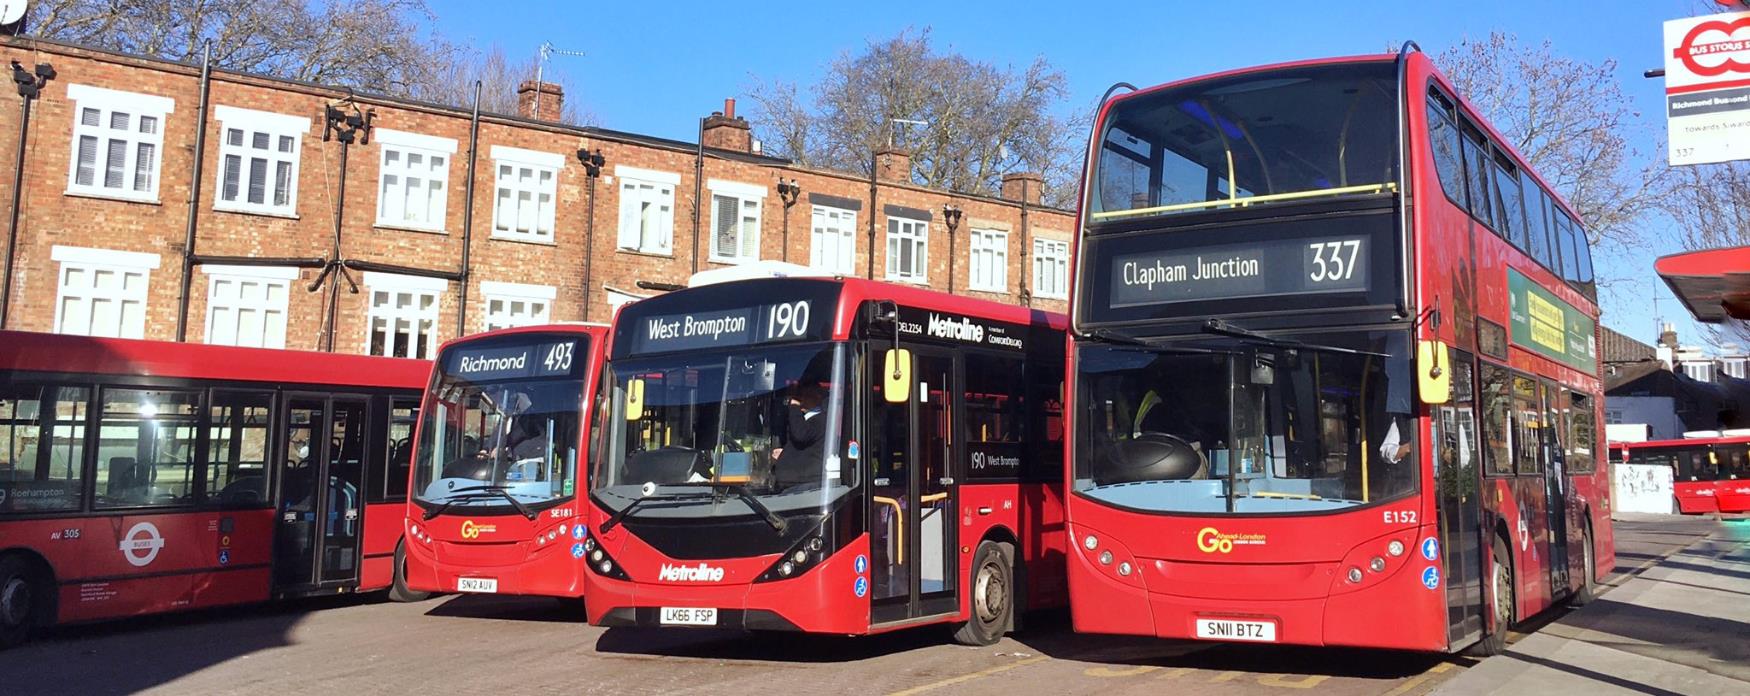 A picture of 4 buses at Richmond station